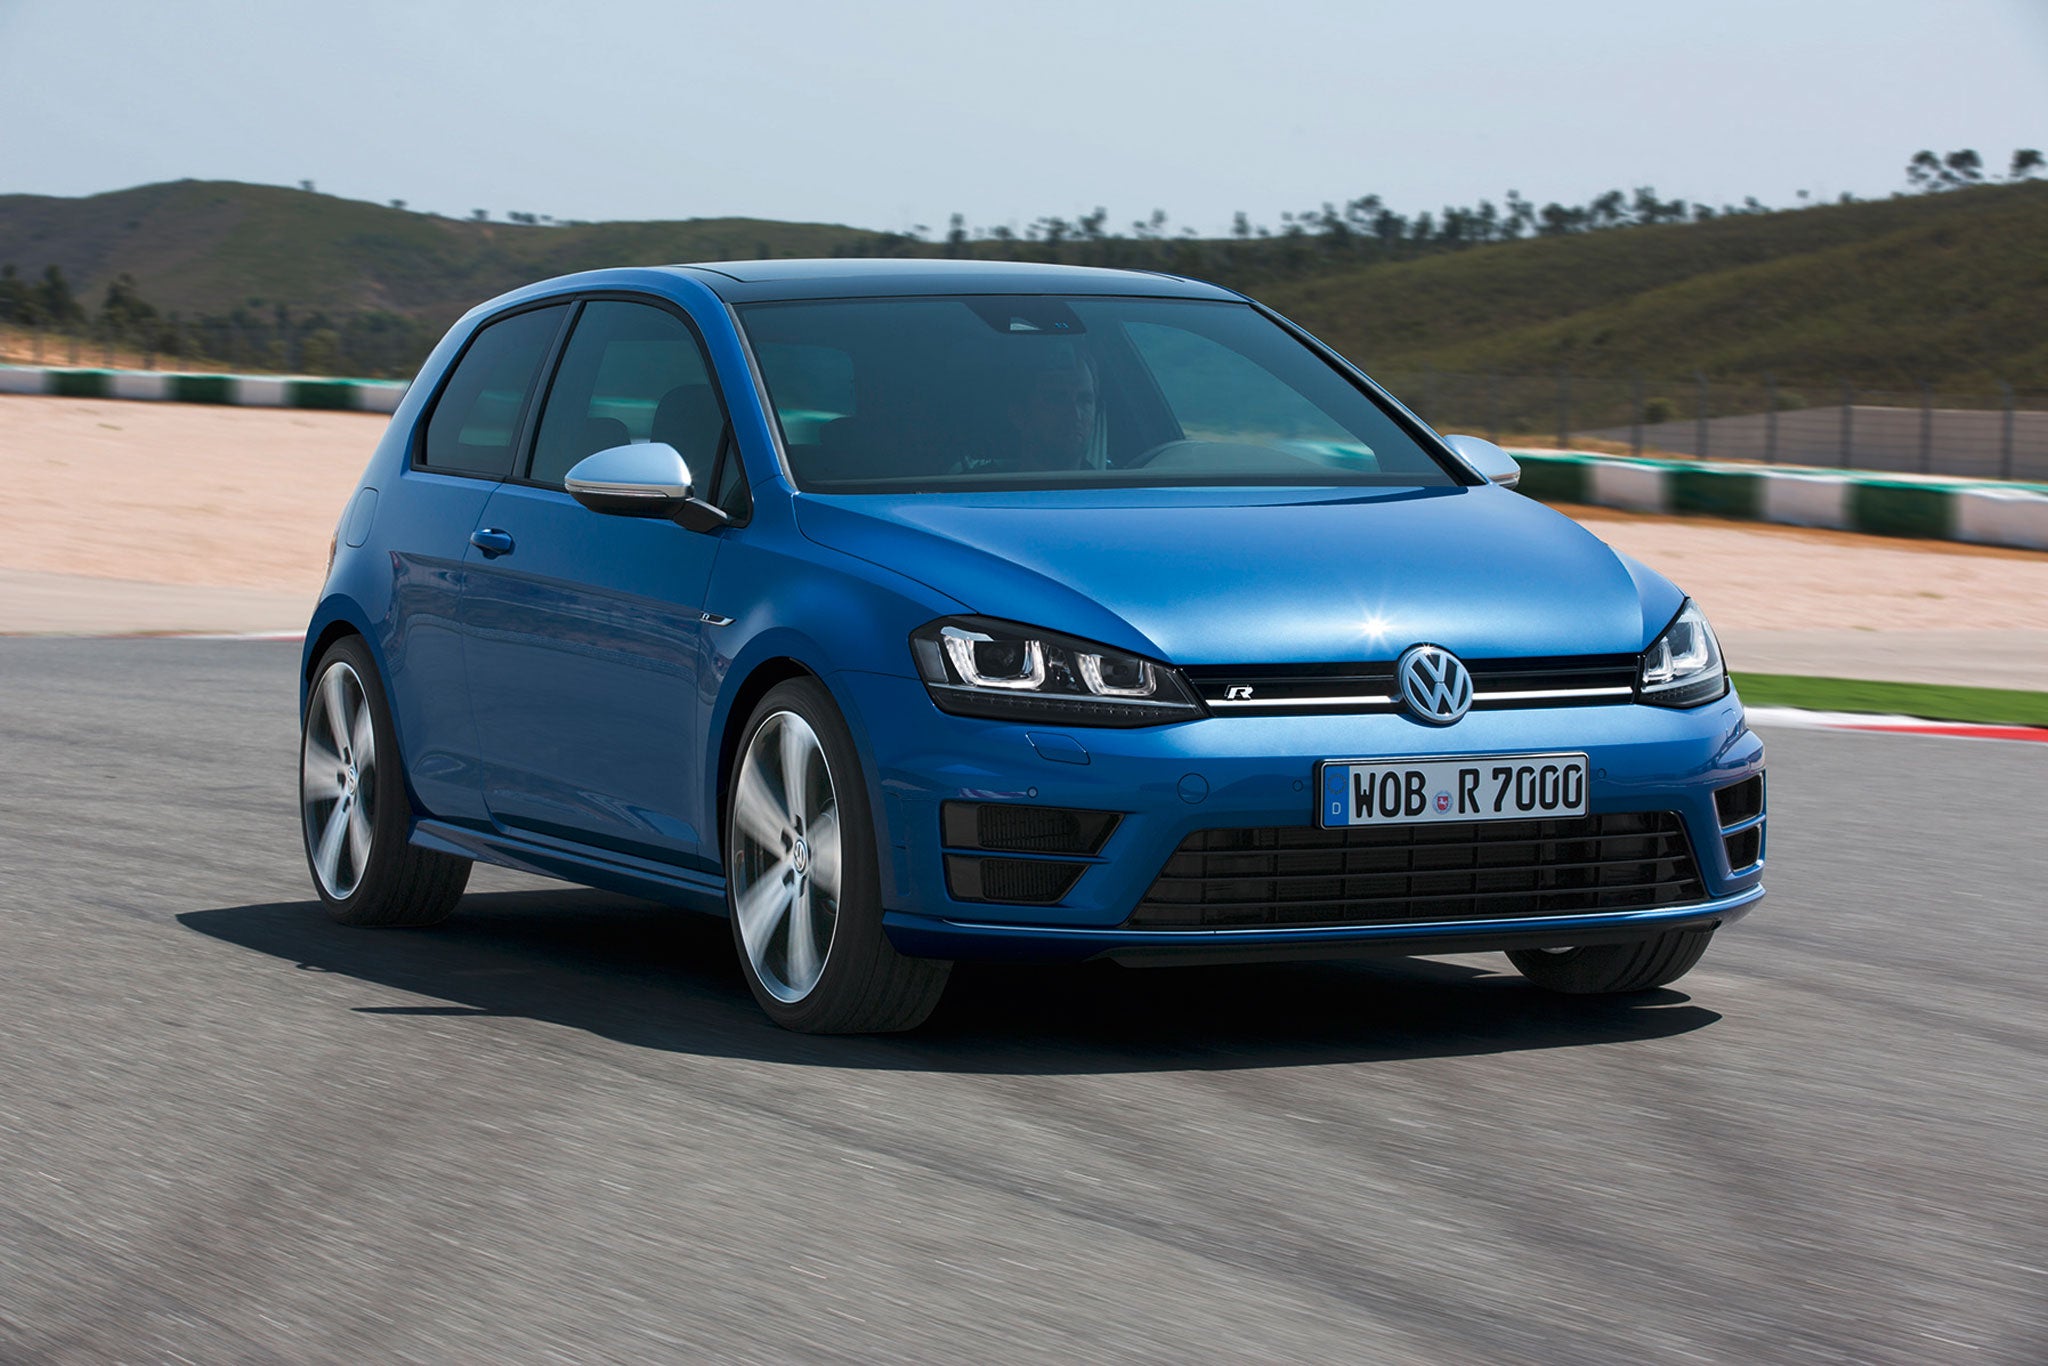 The Golf R is a GTI with all the attributes turned up